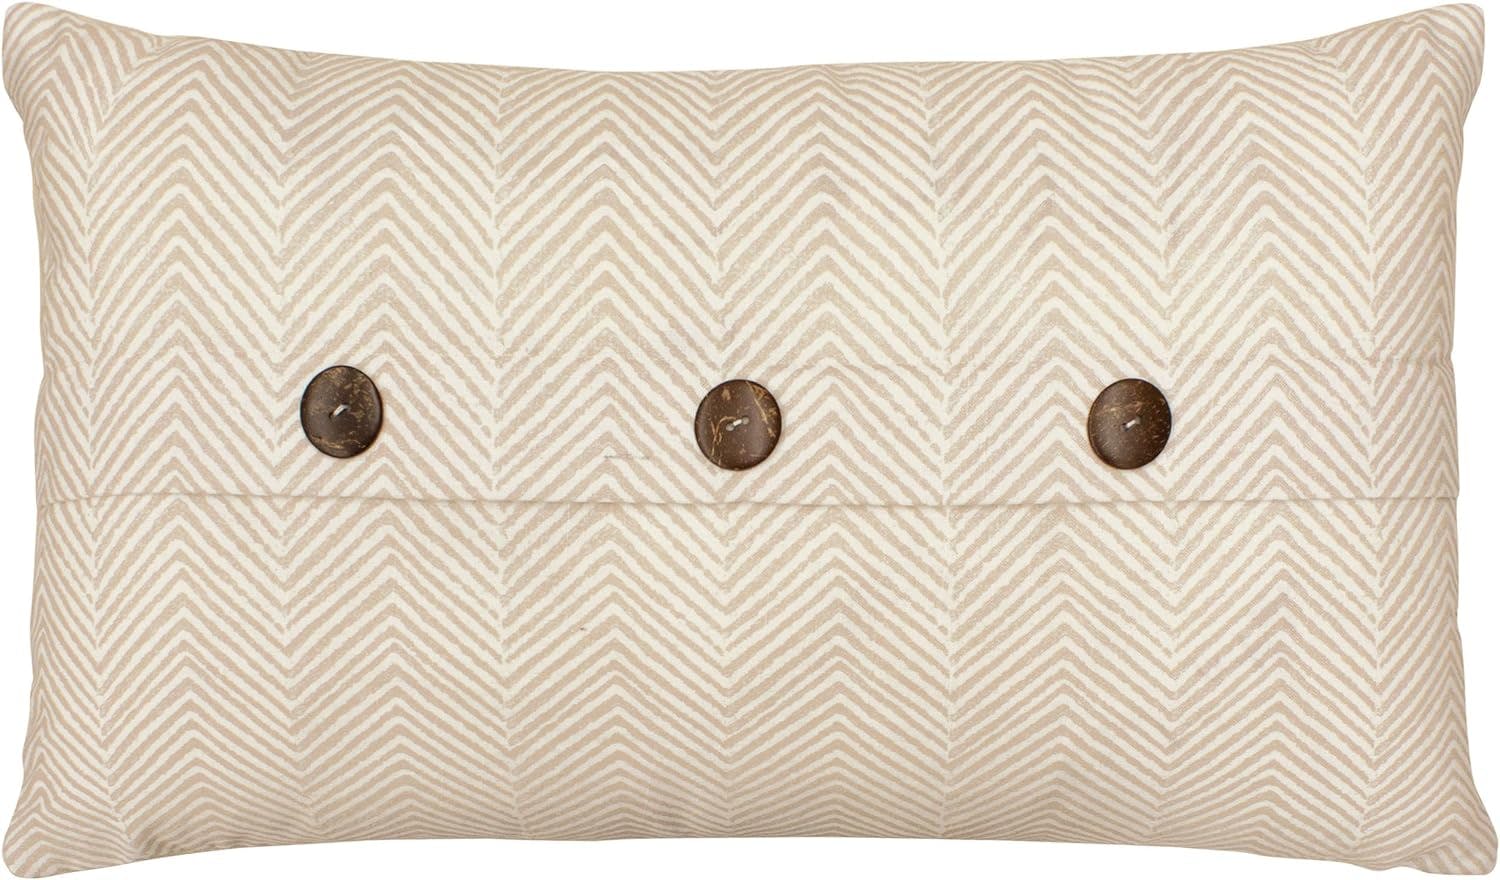 Milly Chevron 14x24 Decorative Pillow Set in Beige and White